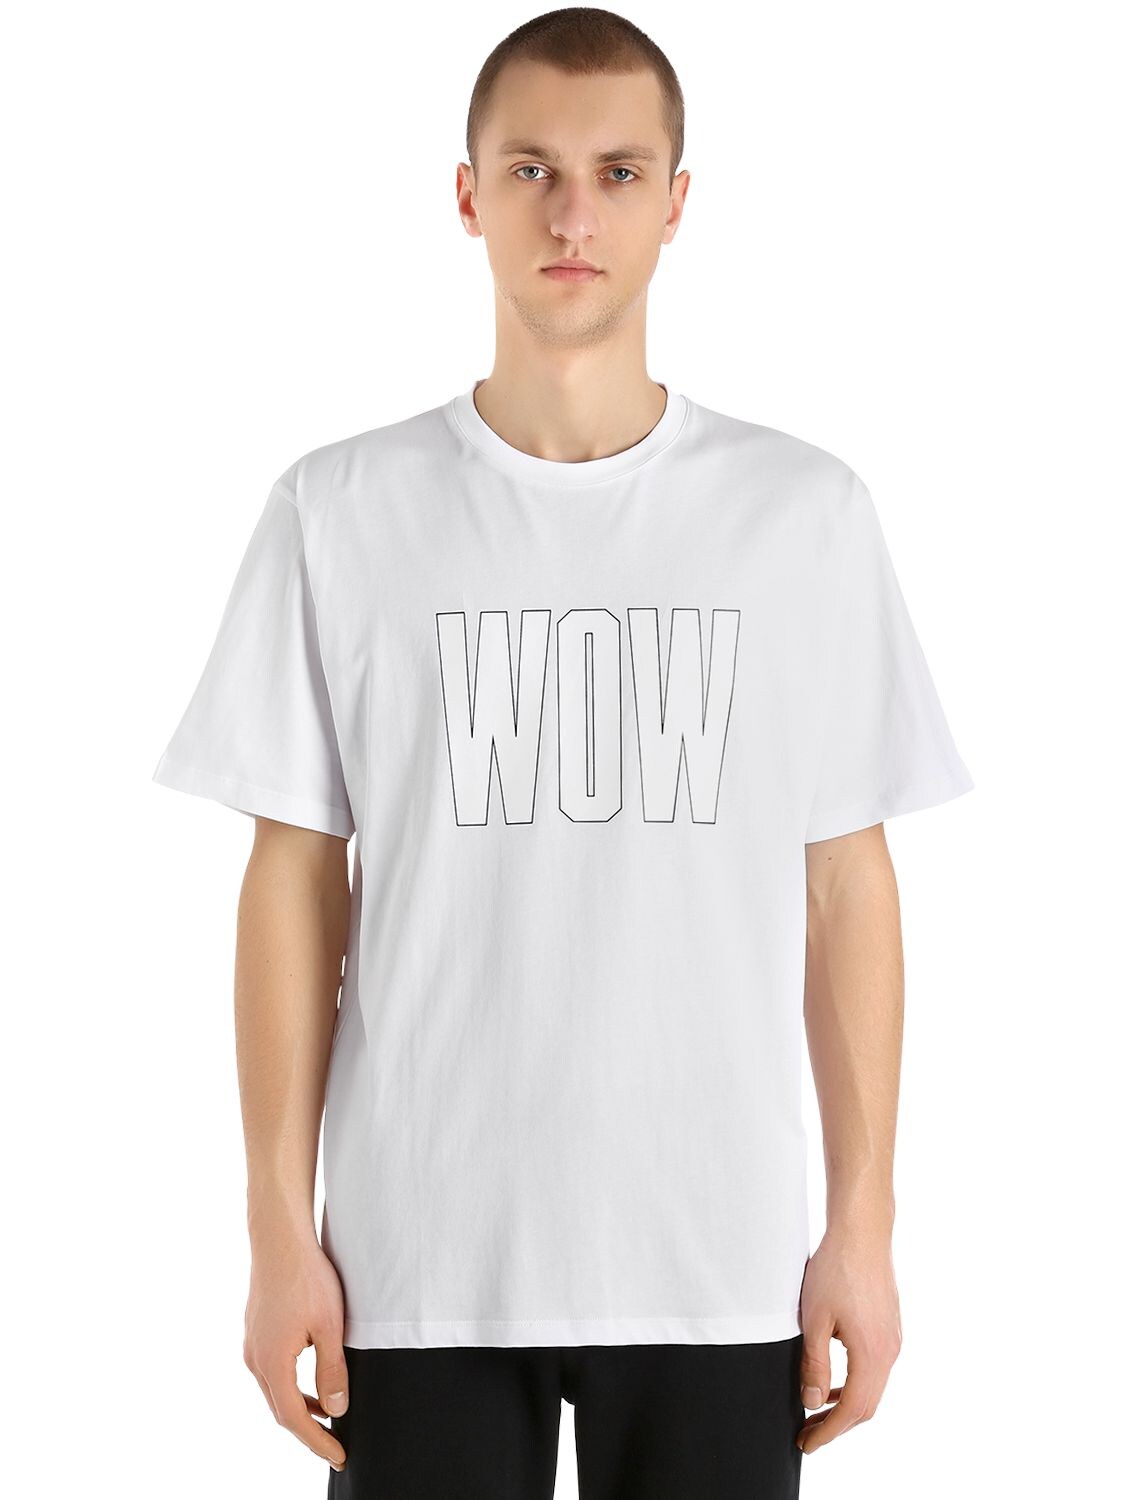 MSGM WOW PRINTED COTTON JERSEY T-SHIRT,67IL6T034-MDE1